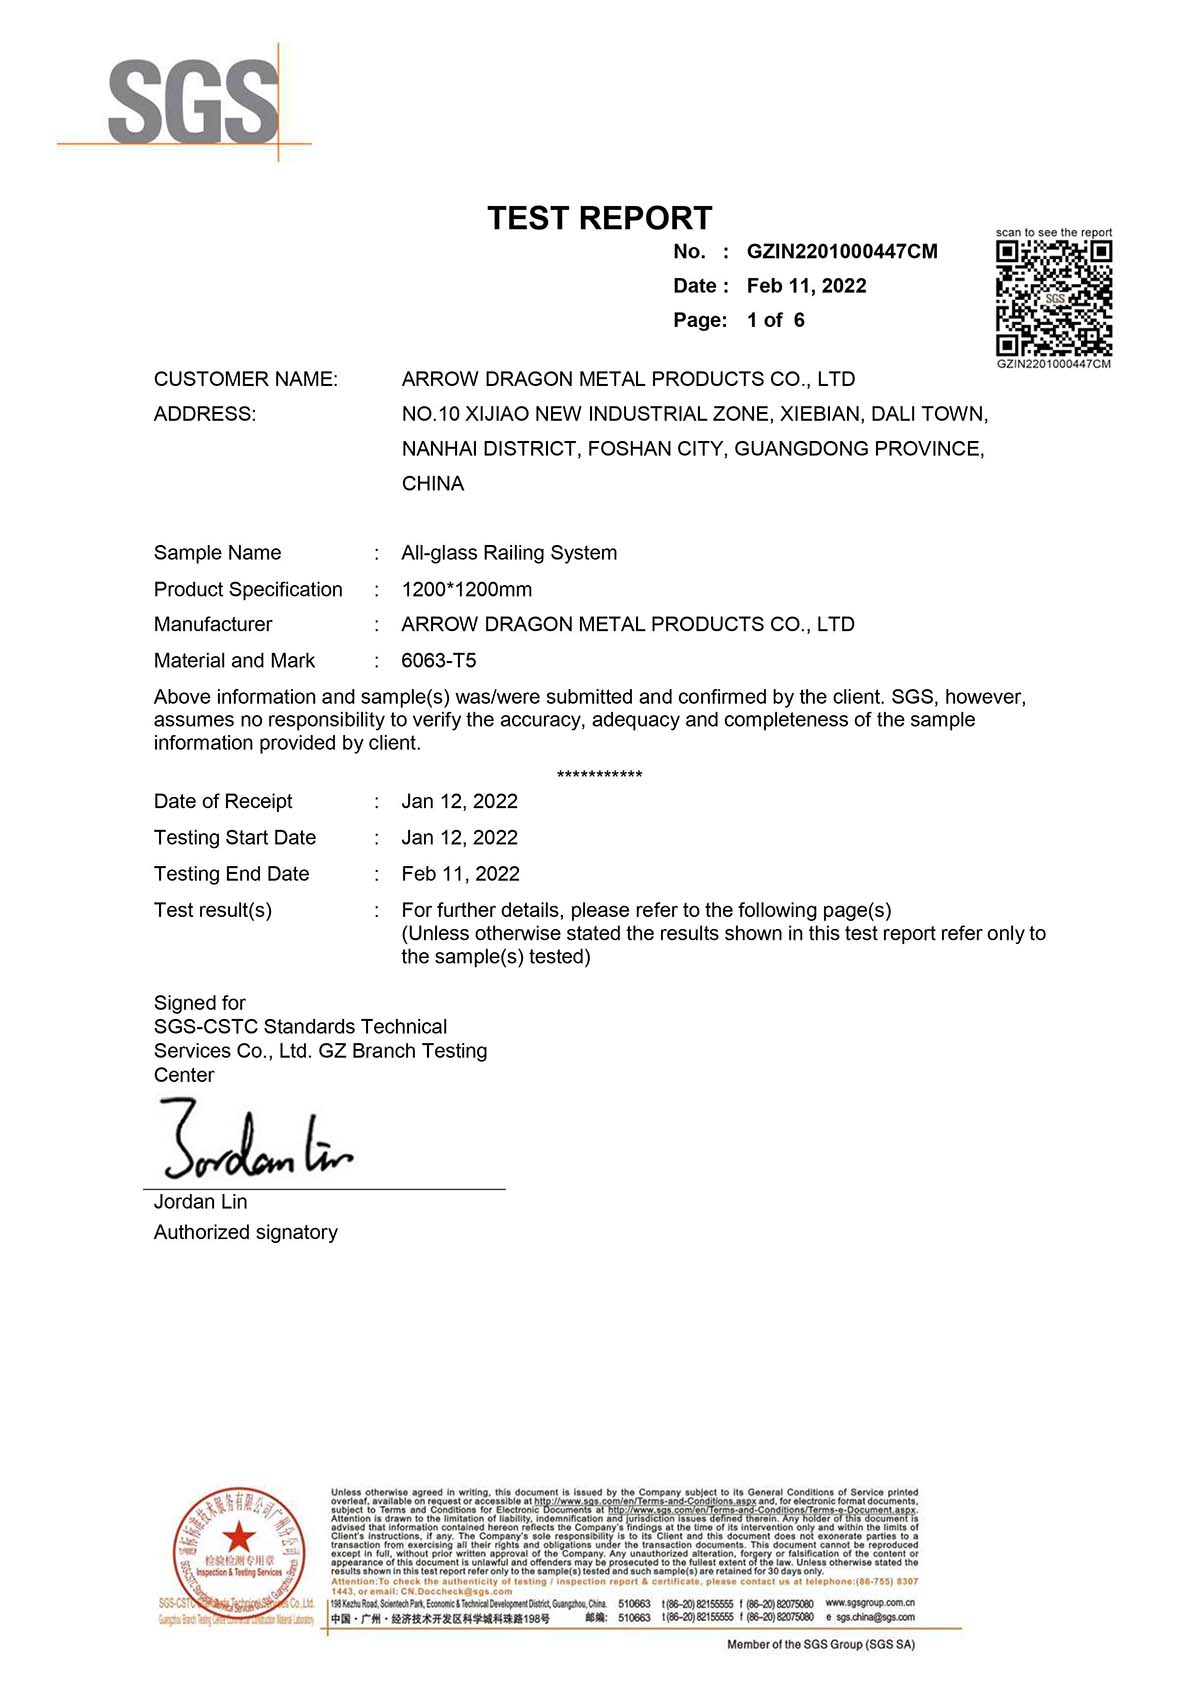 ASTM E2358 test report by SGS 1